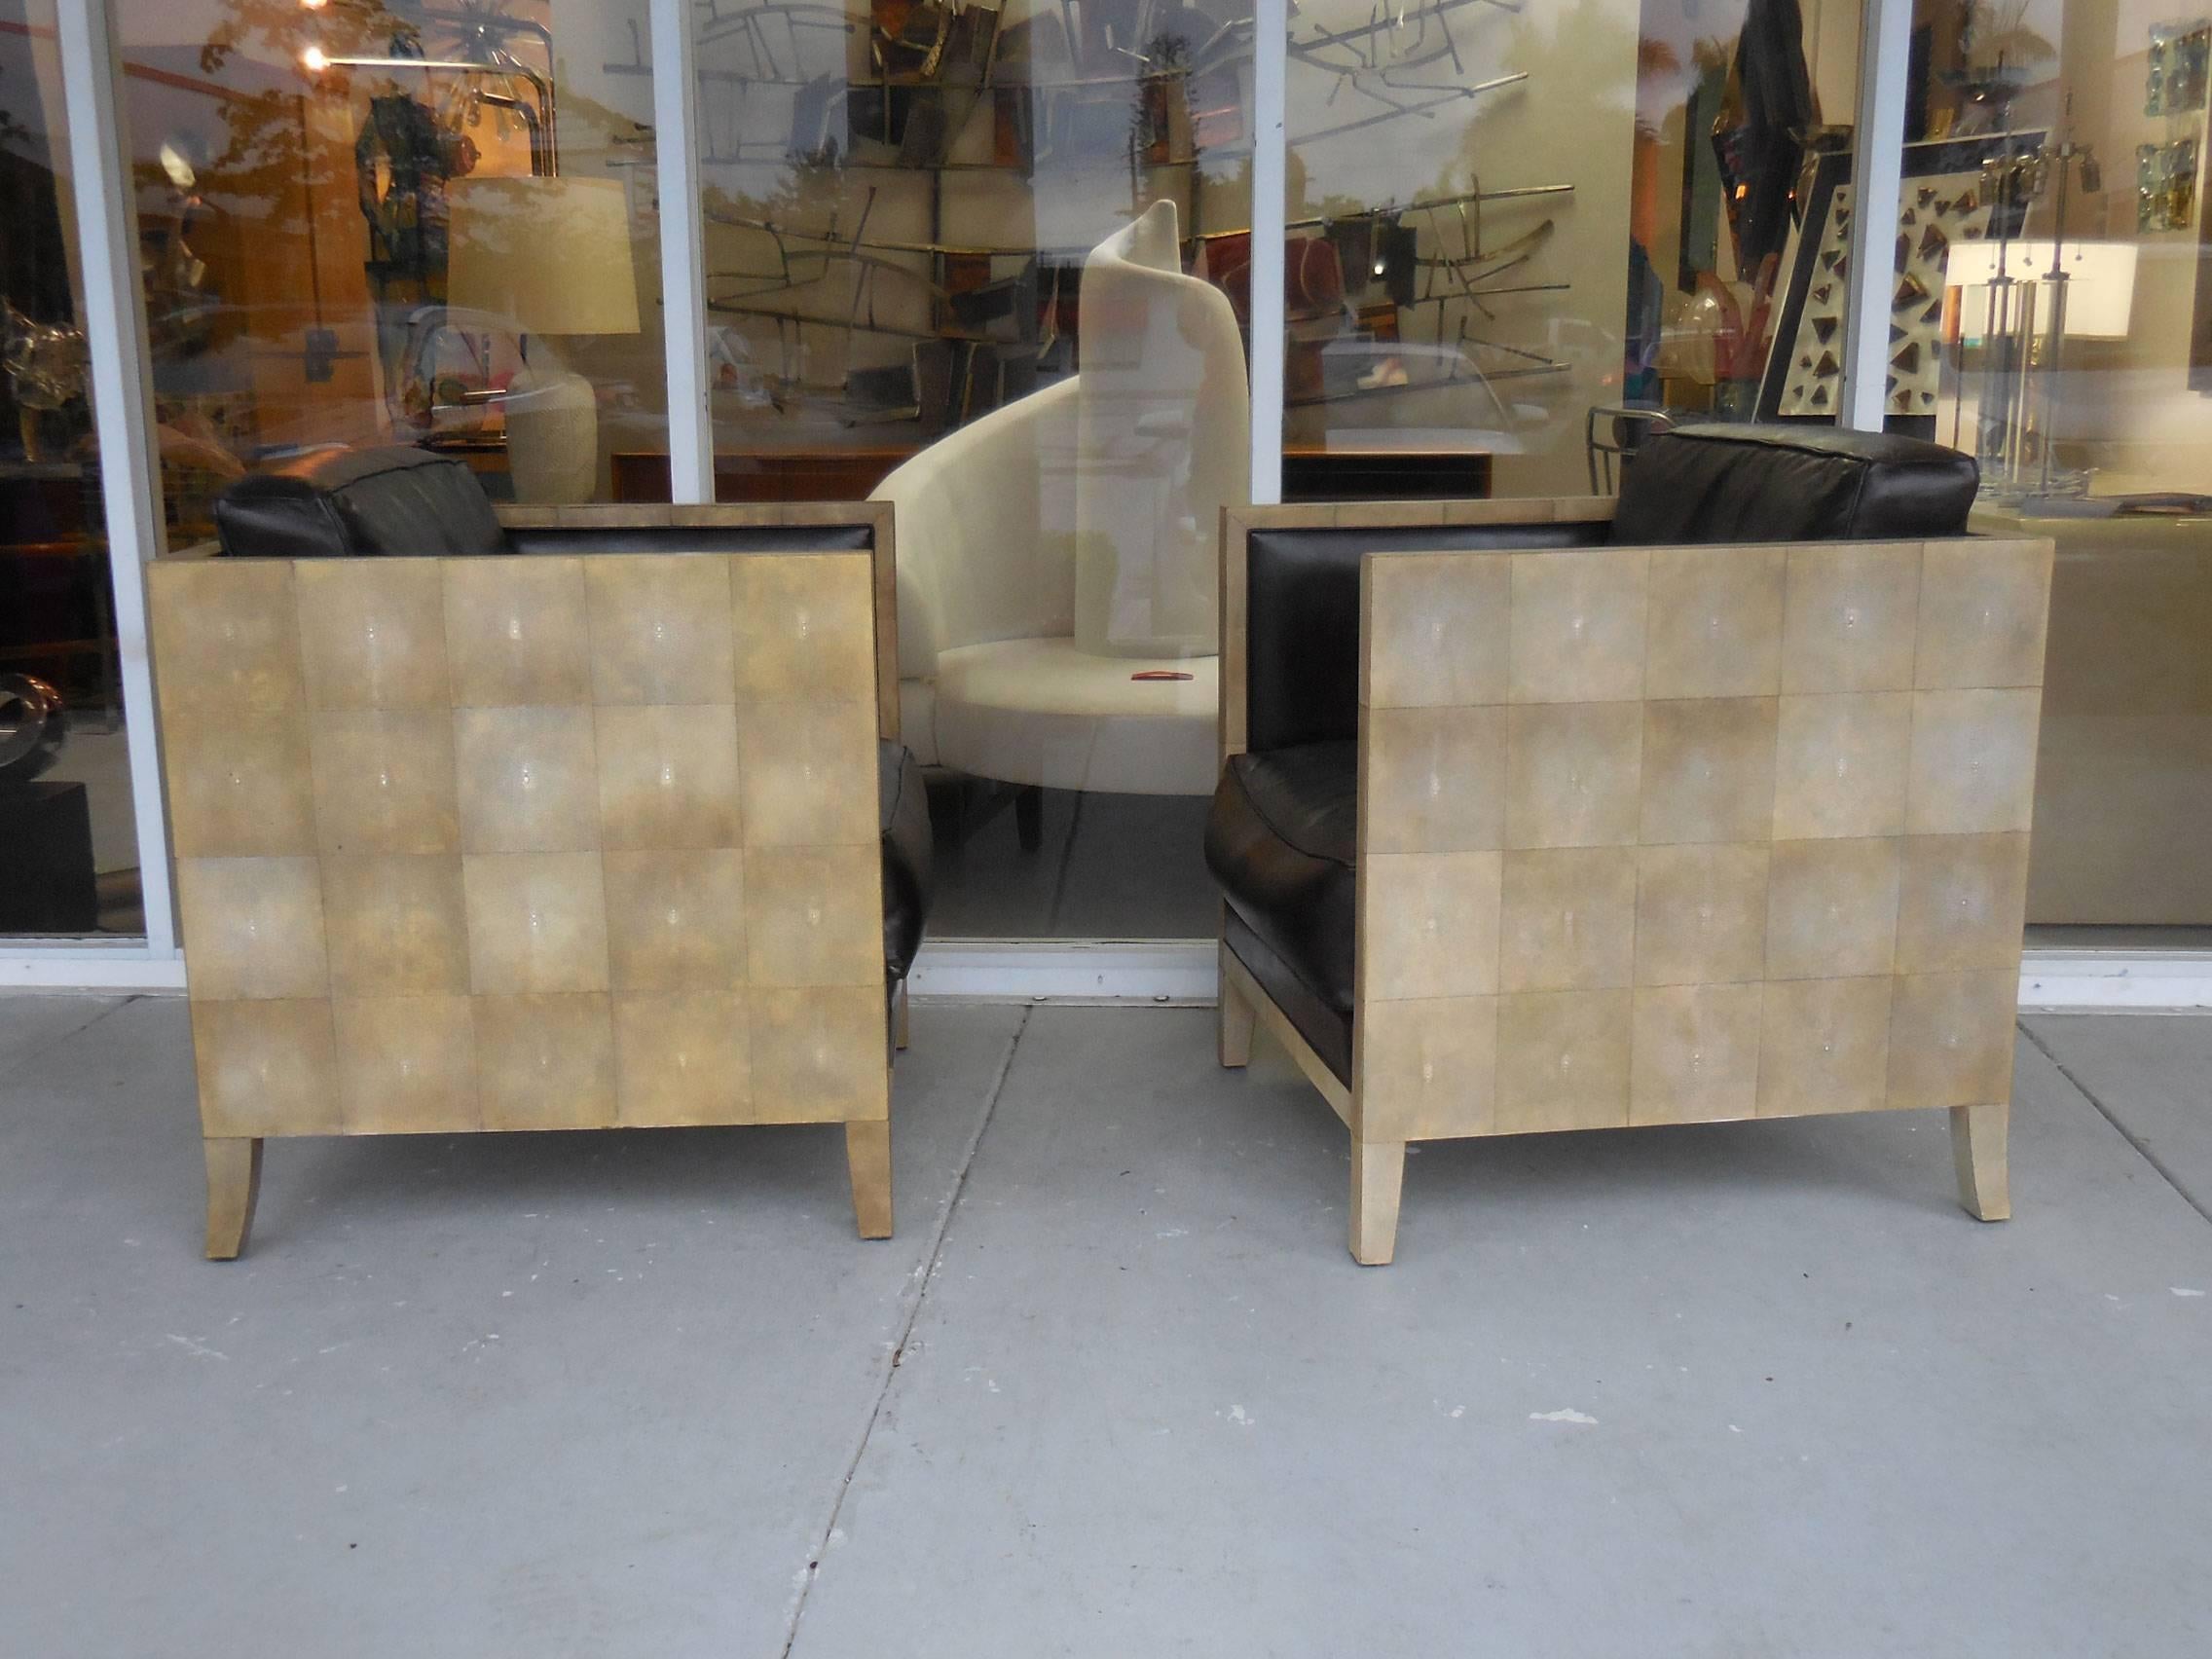 A pair of vintage shagreen and leather chairs in the style of Jean-Michel Frank. Nicely proportioned and stunning from any view.